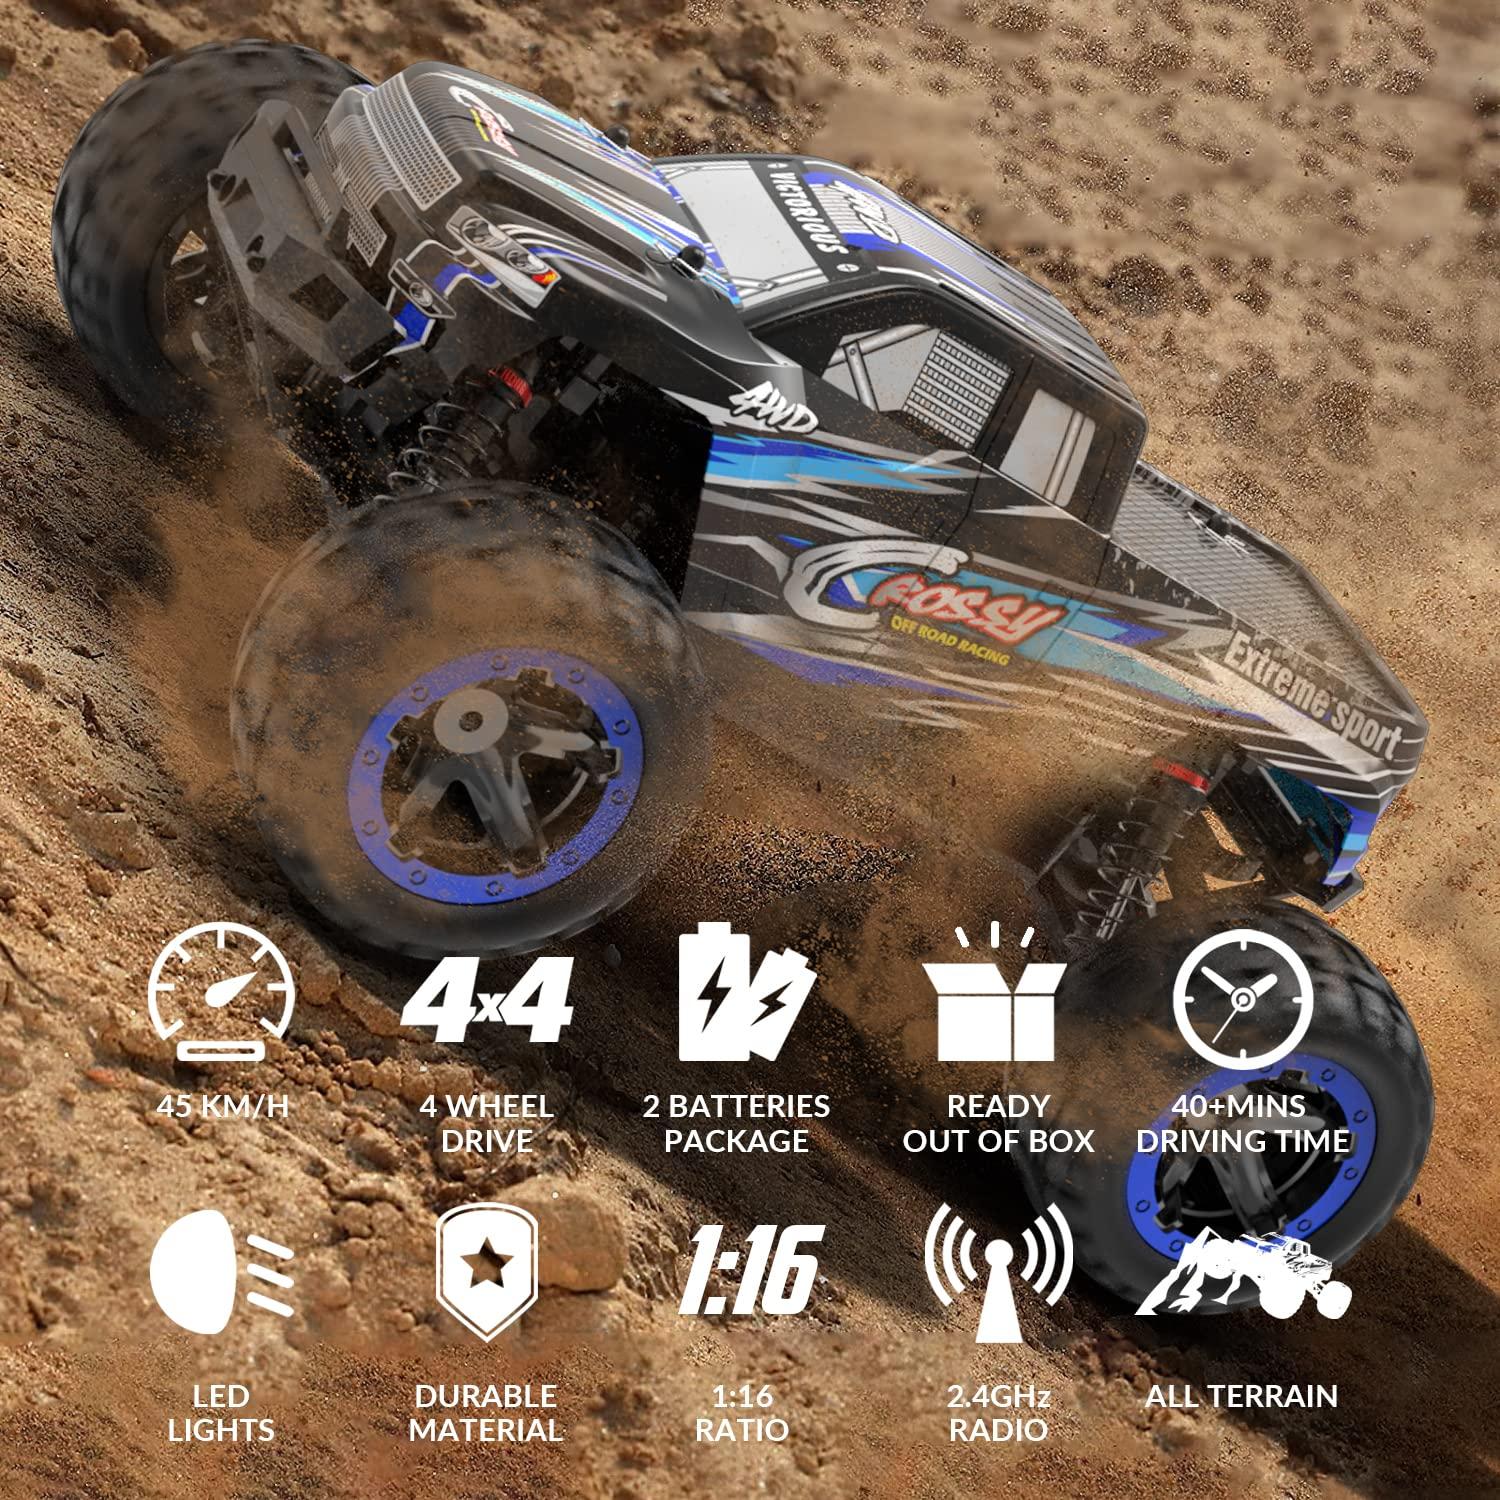 Racing Rally Rc: Find your perfect track: Racing rally RC on various terrains